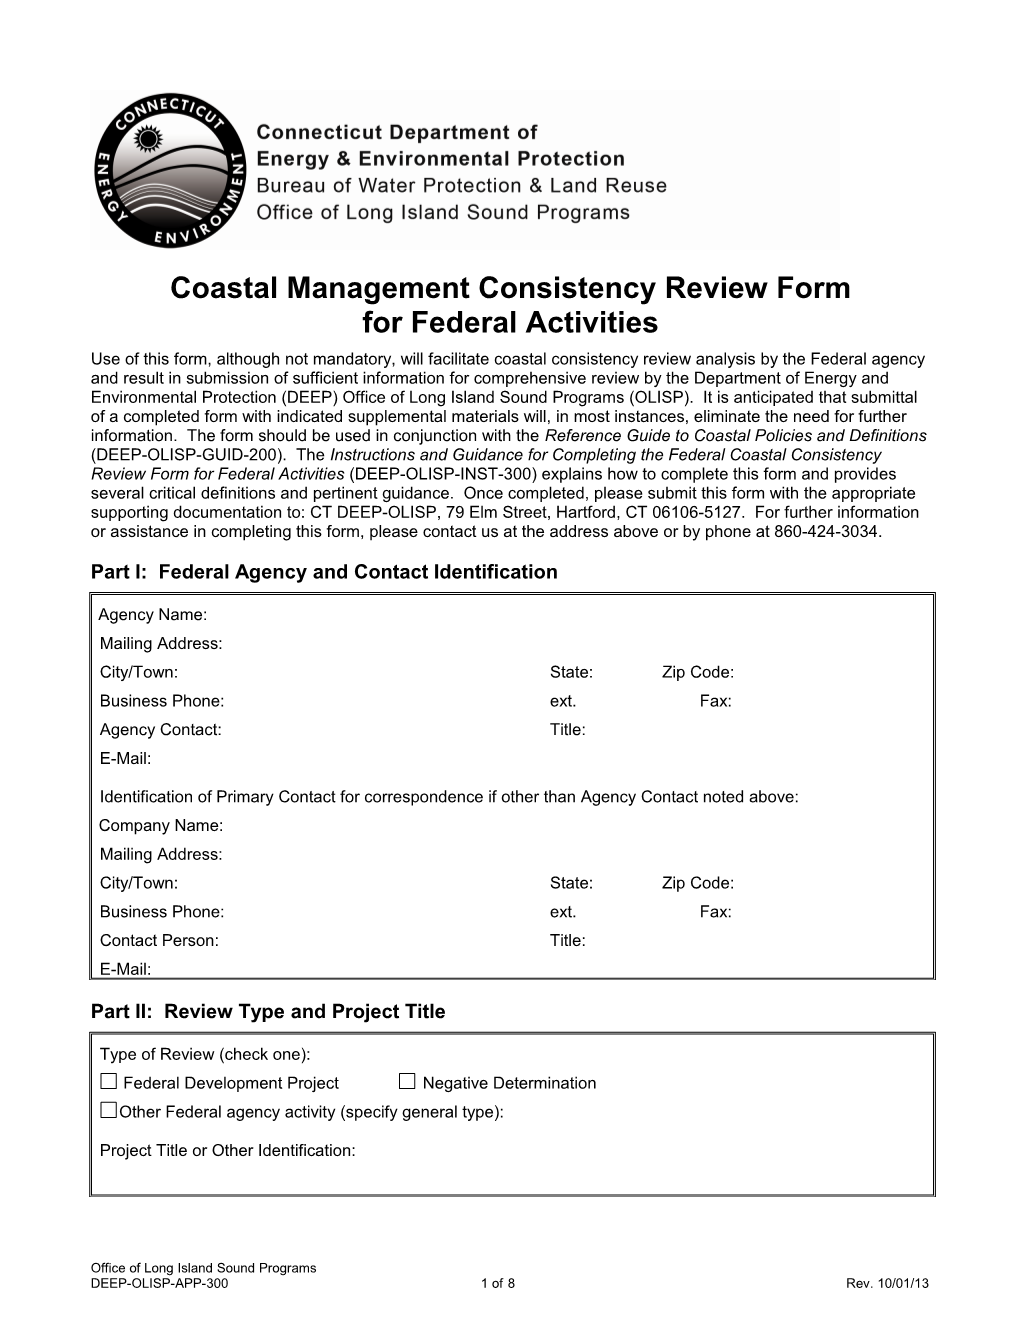 Coastal Management Consistency Review Form For Federal Activities